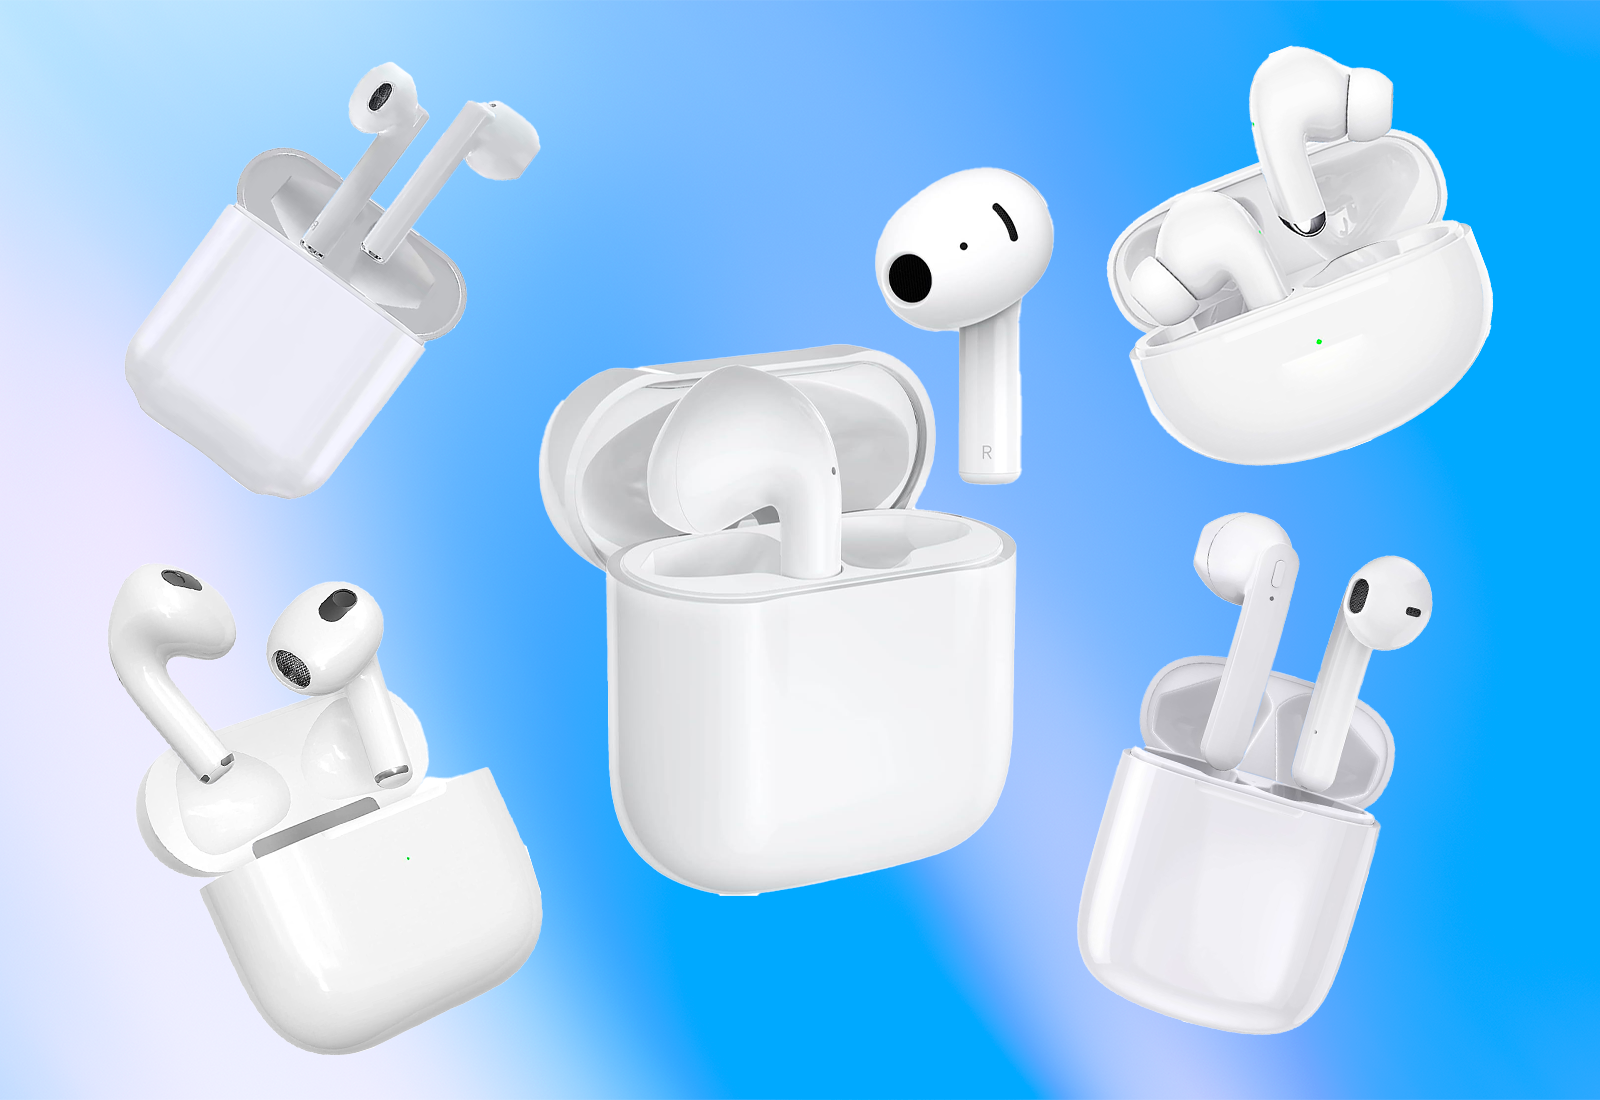 20 Super Cute Apple AirPods Pro Cases You Can Get For Under $10